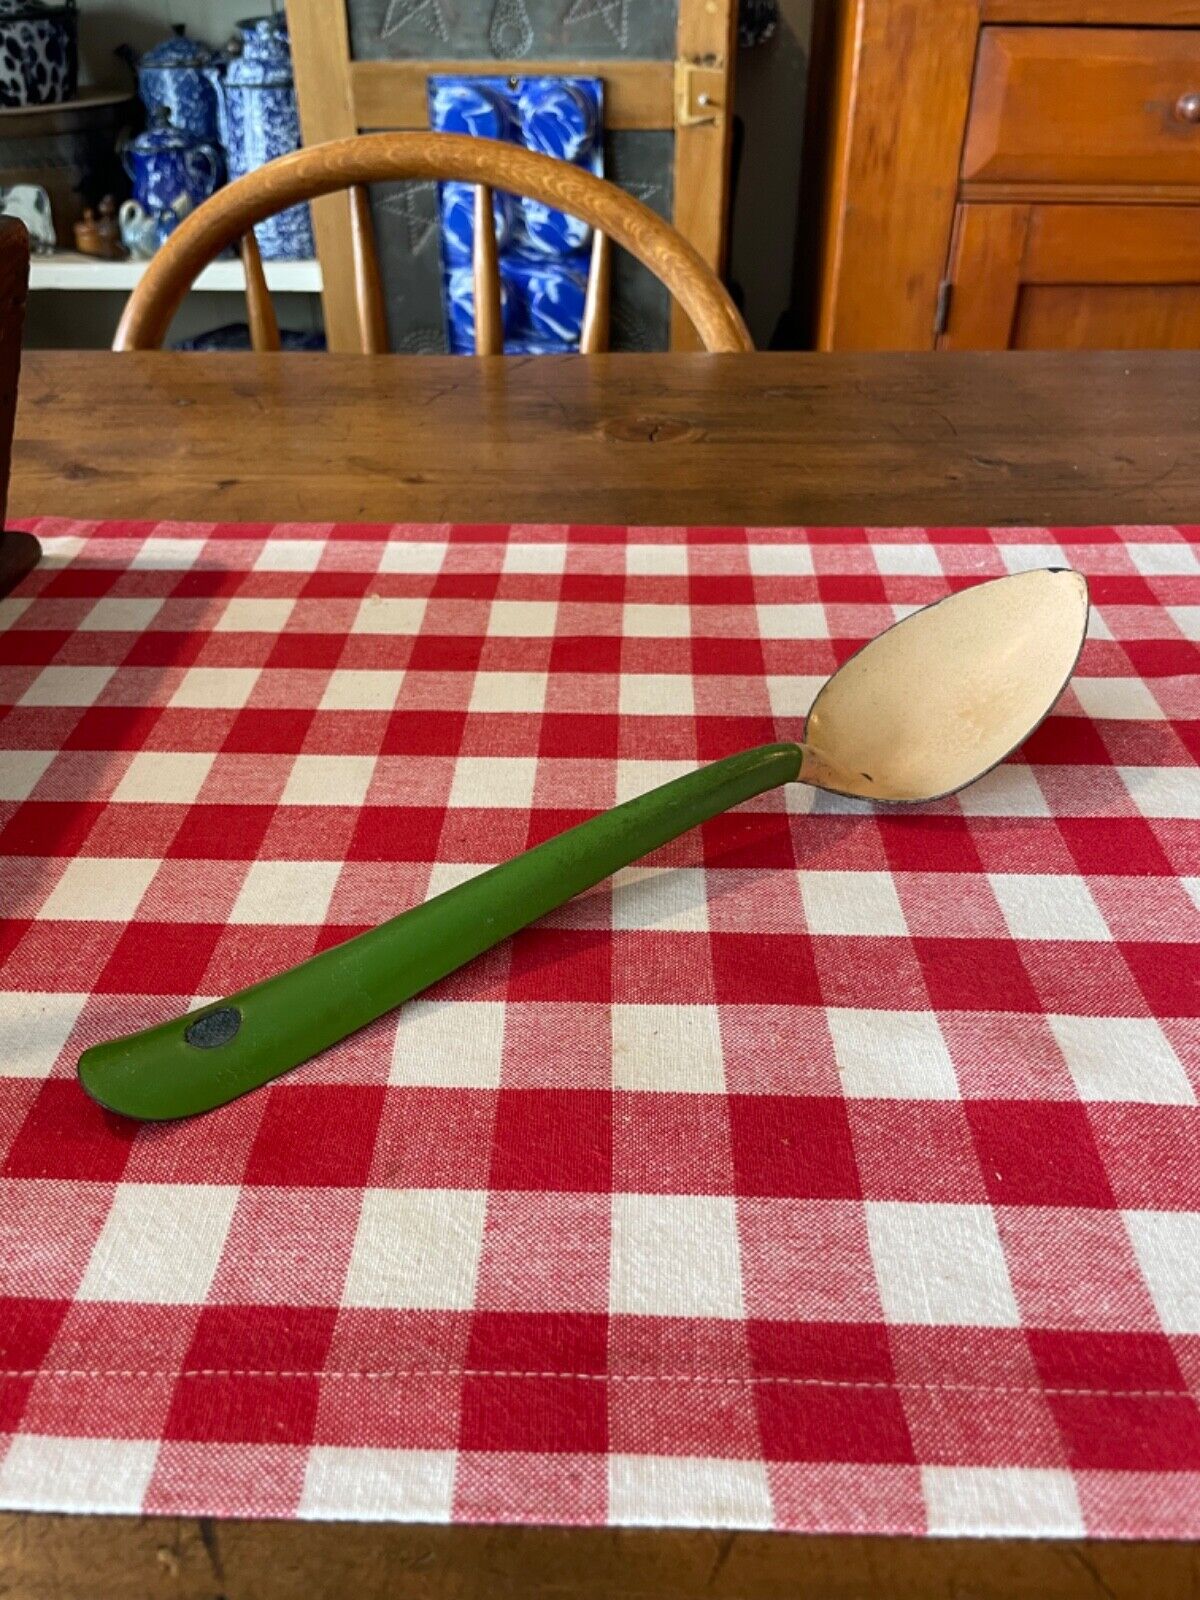 Antique Cream and Green Graniteware Spoon (11 1/2 inches long)